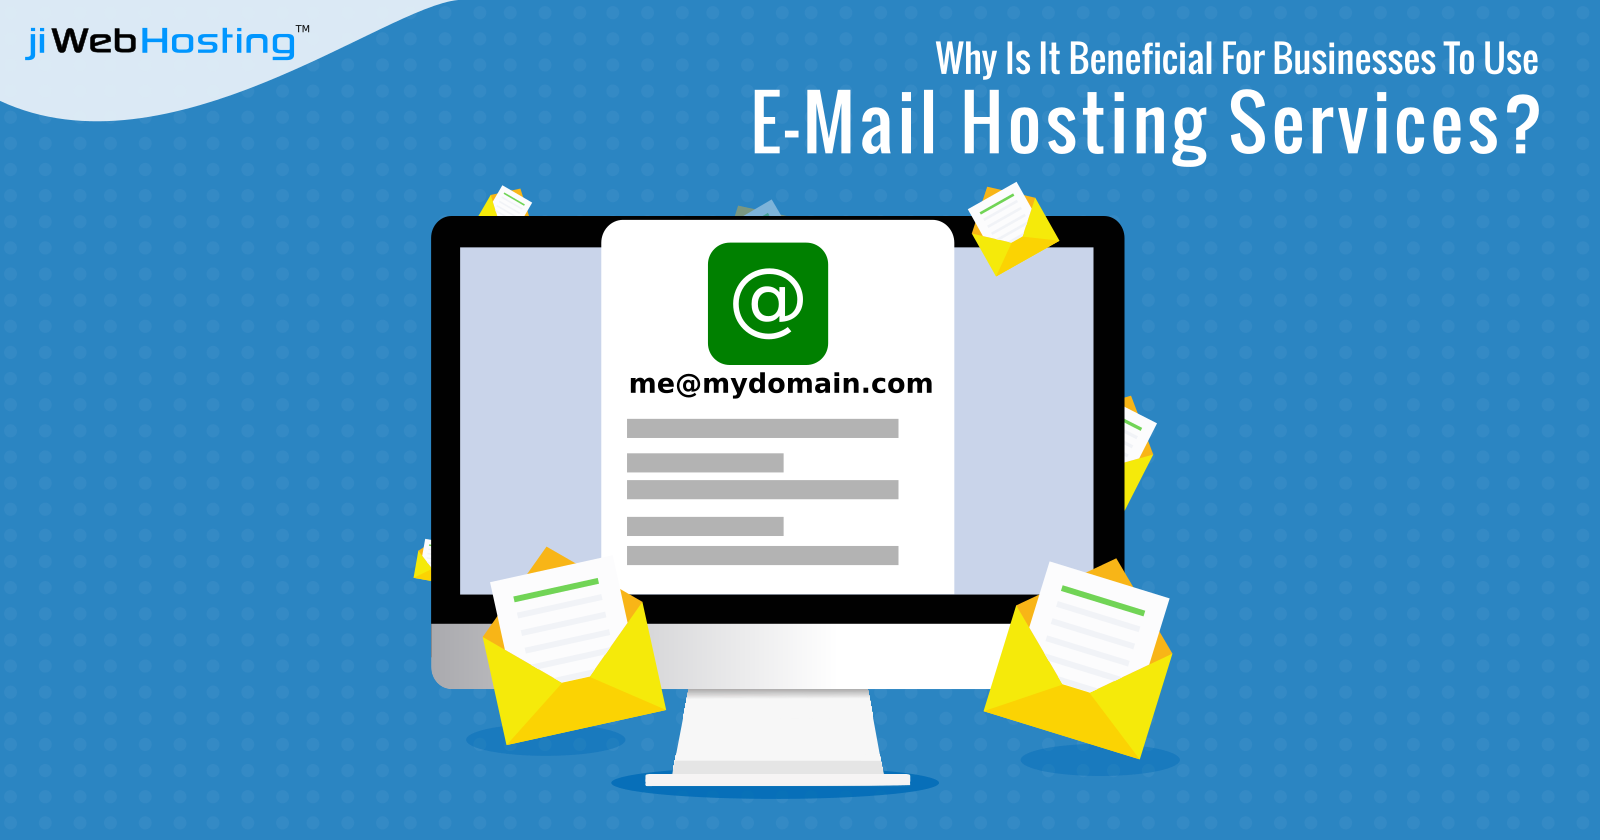 Why Is It Beneficial For Businesses To Use E-Mail Hosting Services?